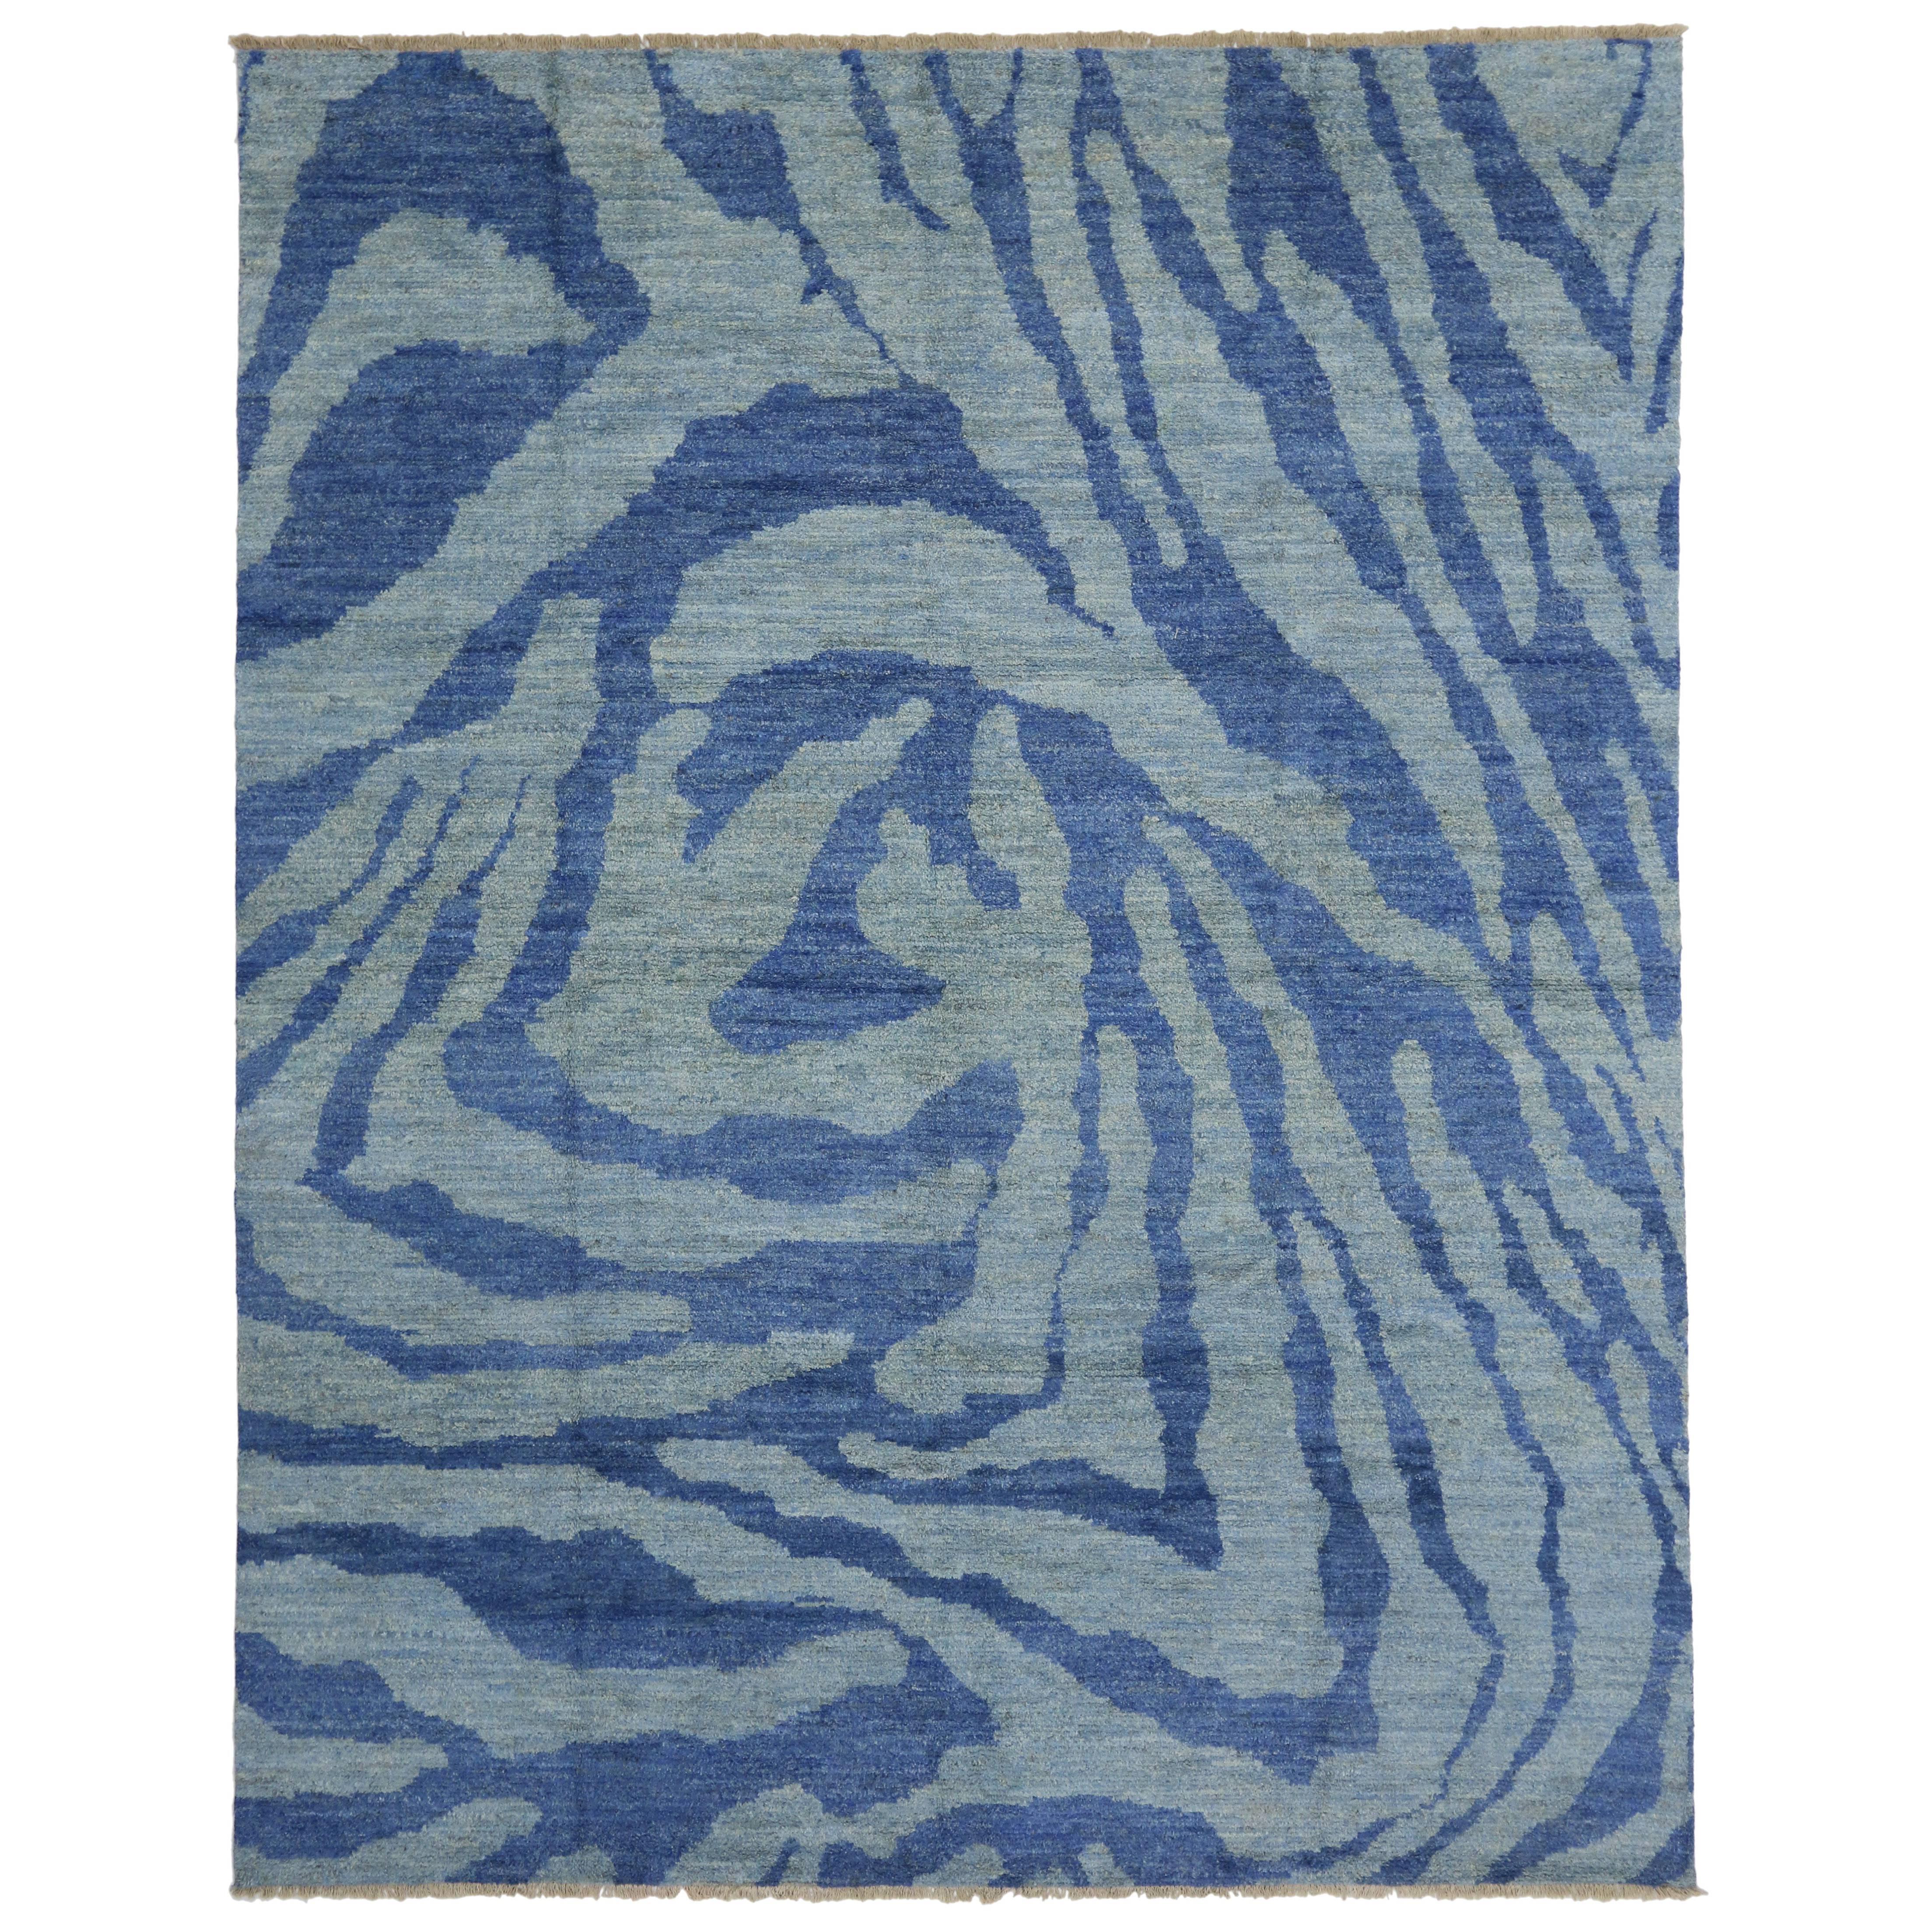 New Contemporary Moroccan Rug with Abstract Expressionism Style, Coastal Colors